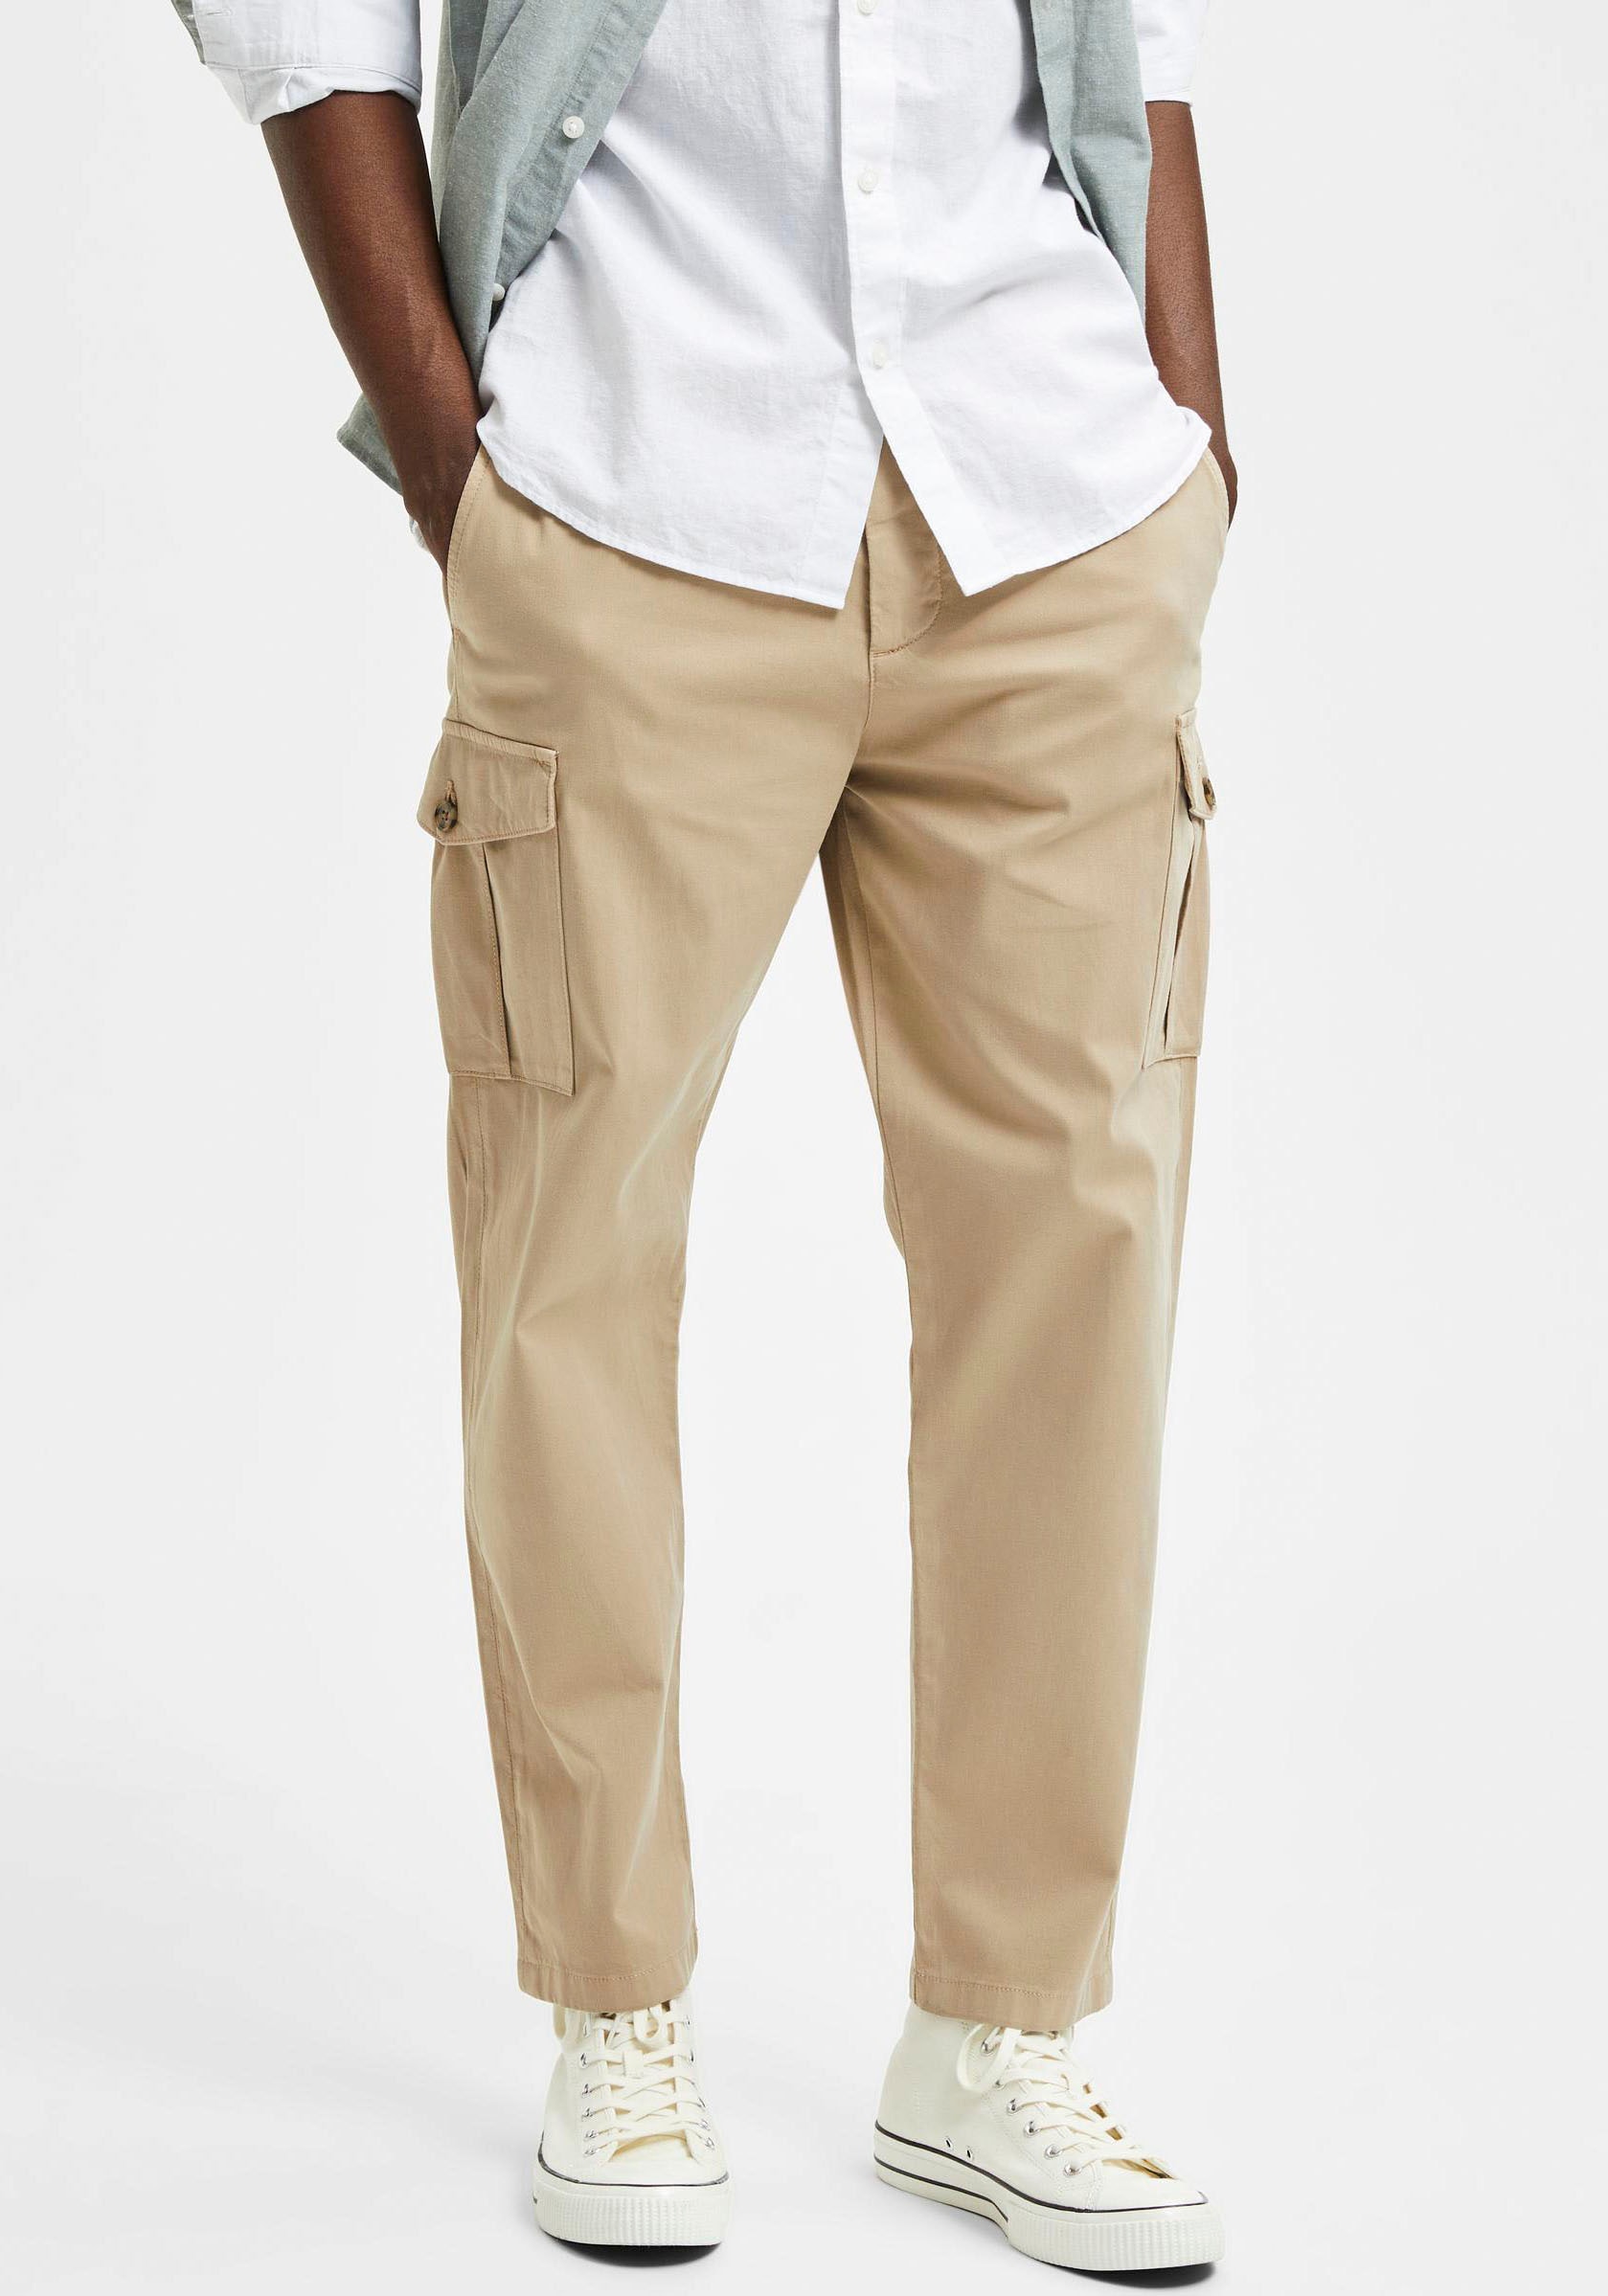 PANT« OTTO bei HOMME CARGO SELECTED »WICK kaufen online Cargohose